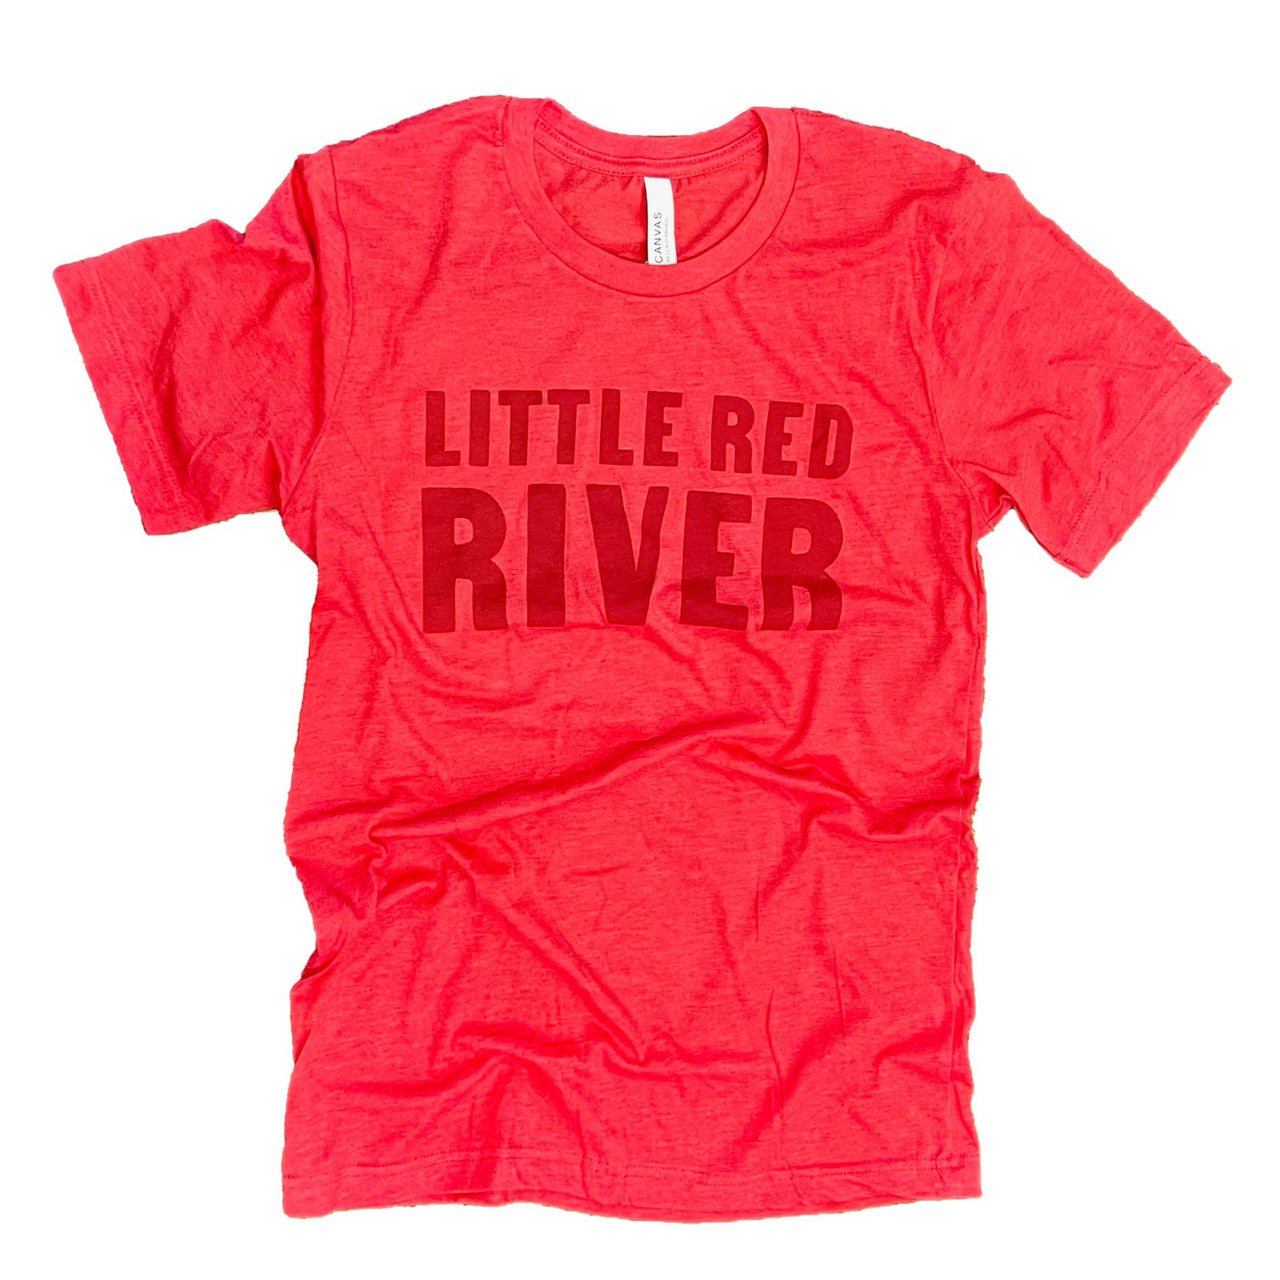 Little Red River Tee | Red